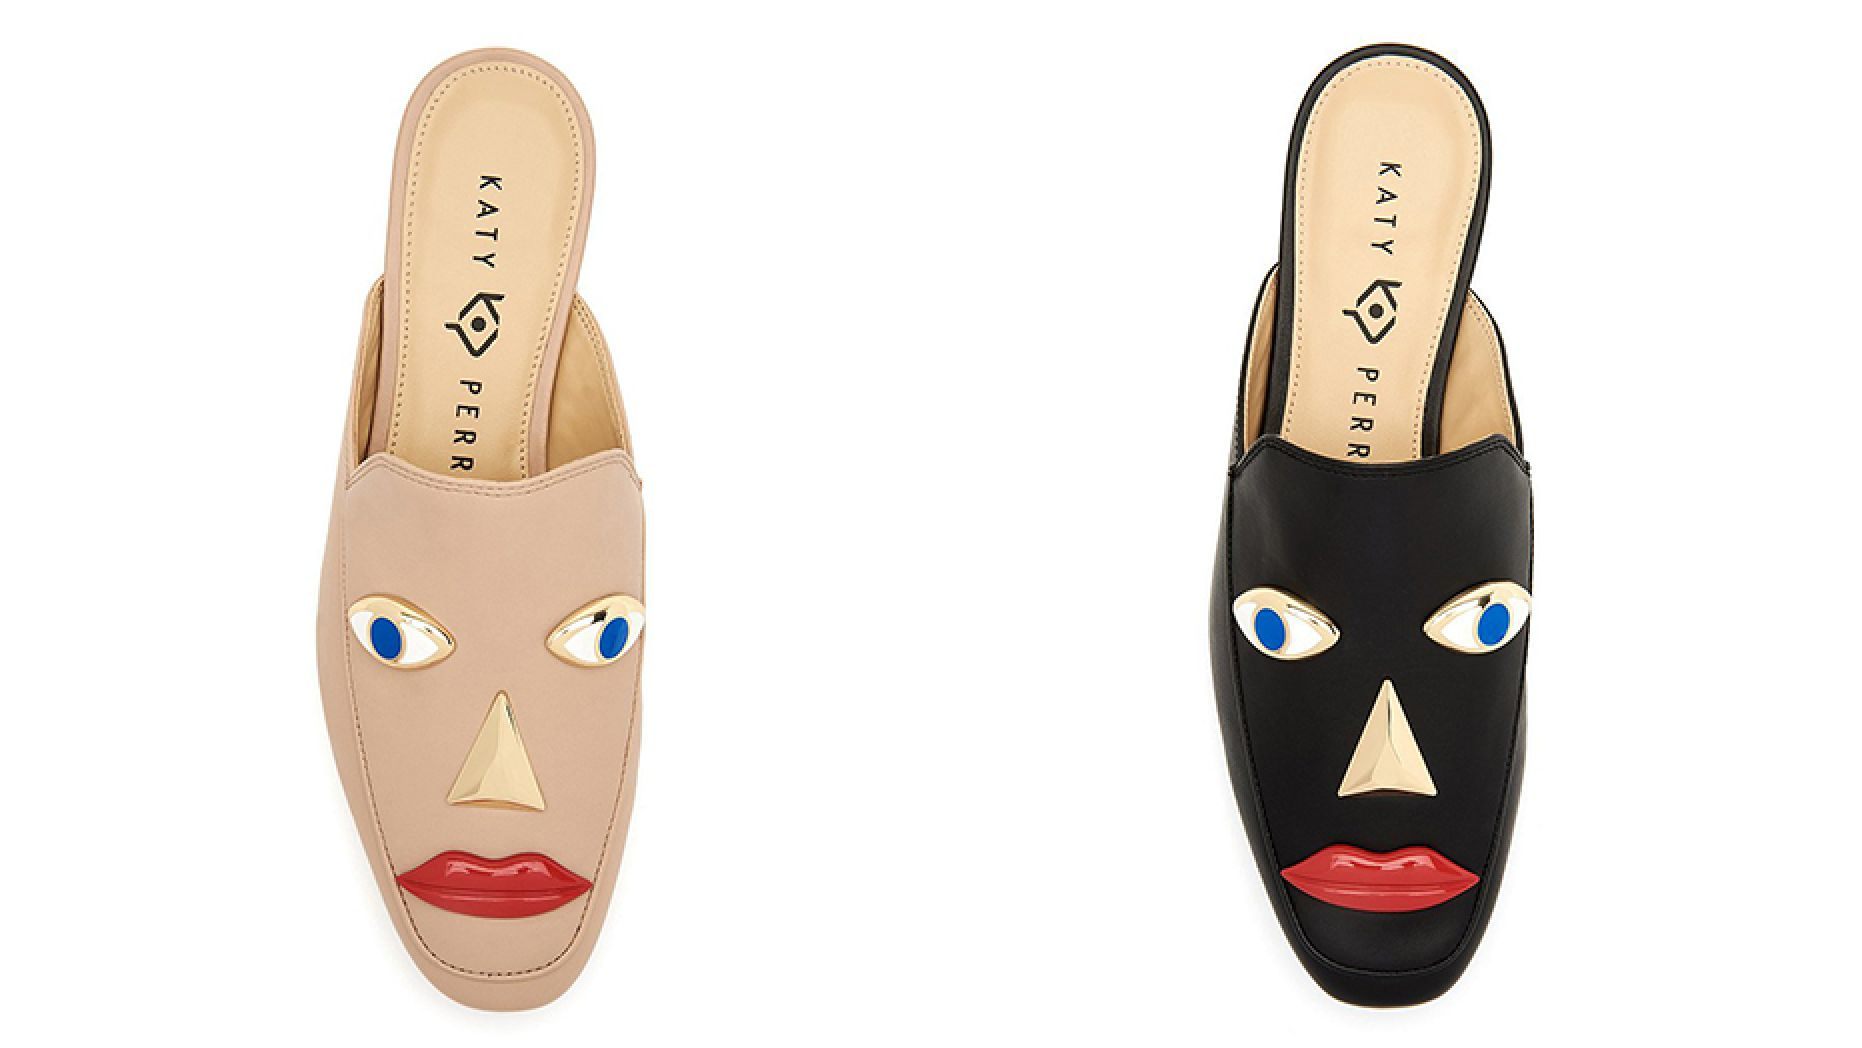 Fashion brand Katy Perry withdraws from shoes, which is reminiscent of the scandalous way Blackface